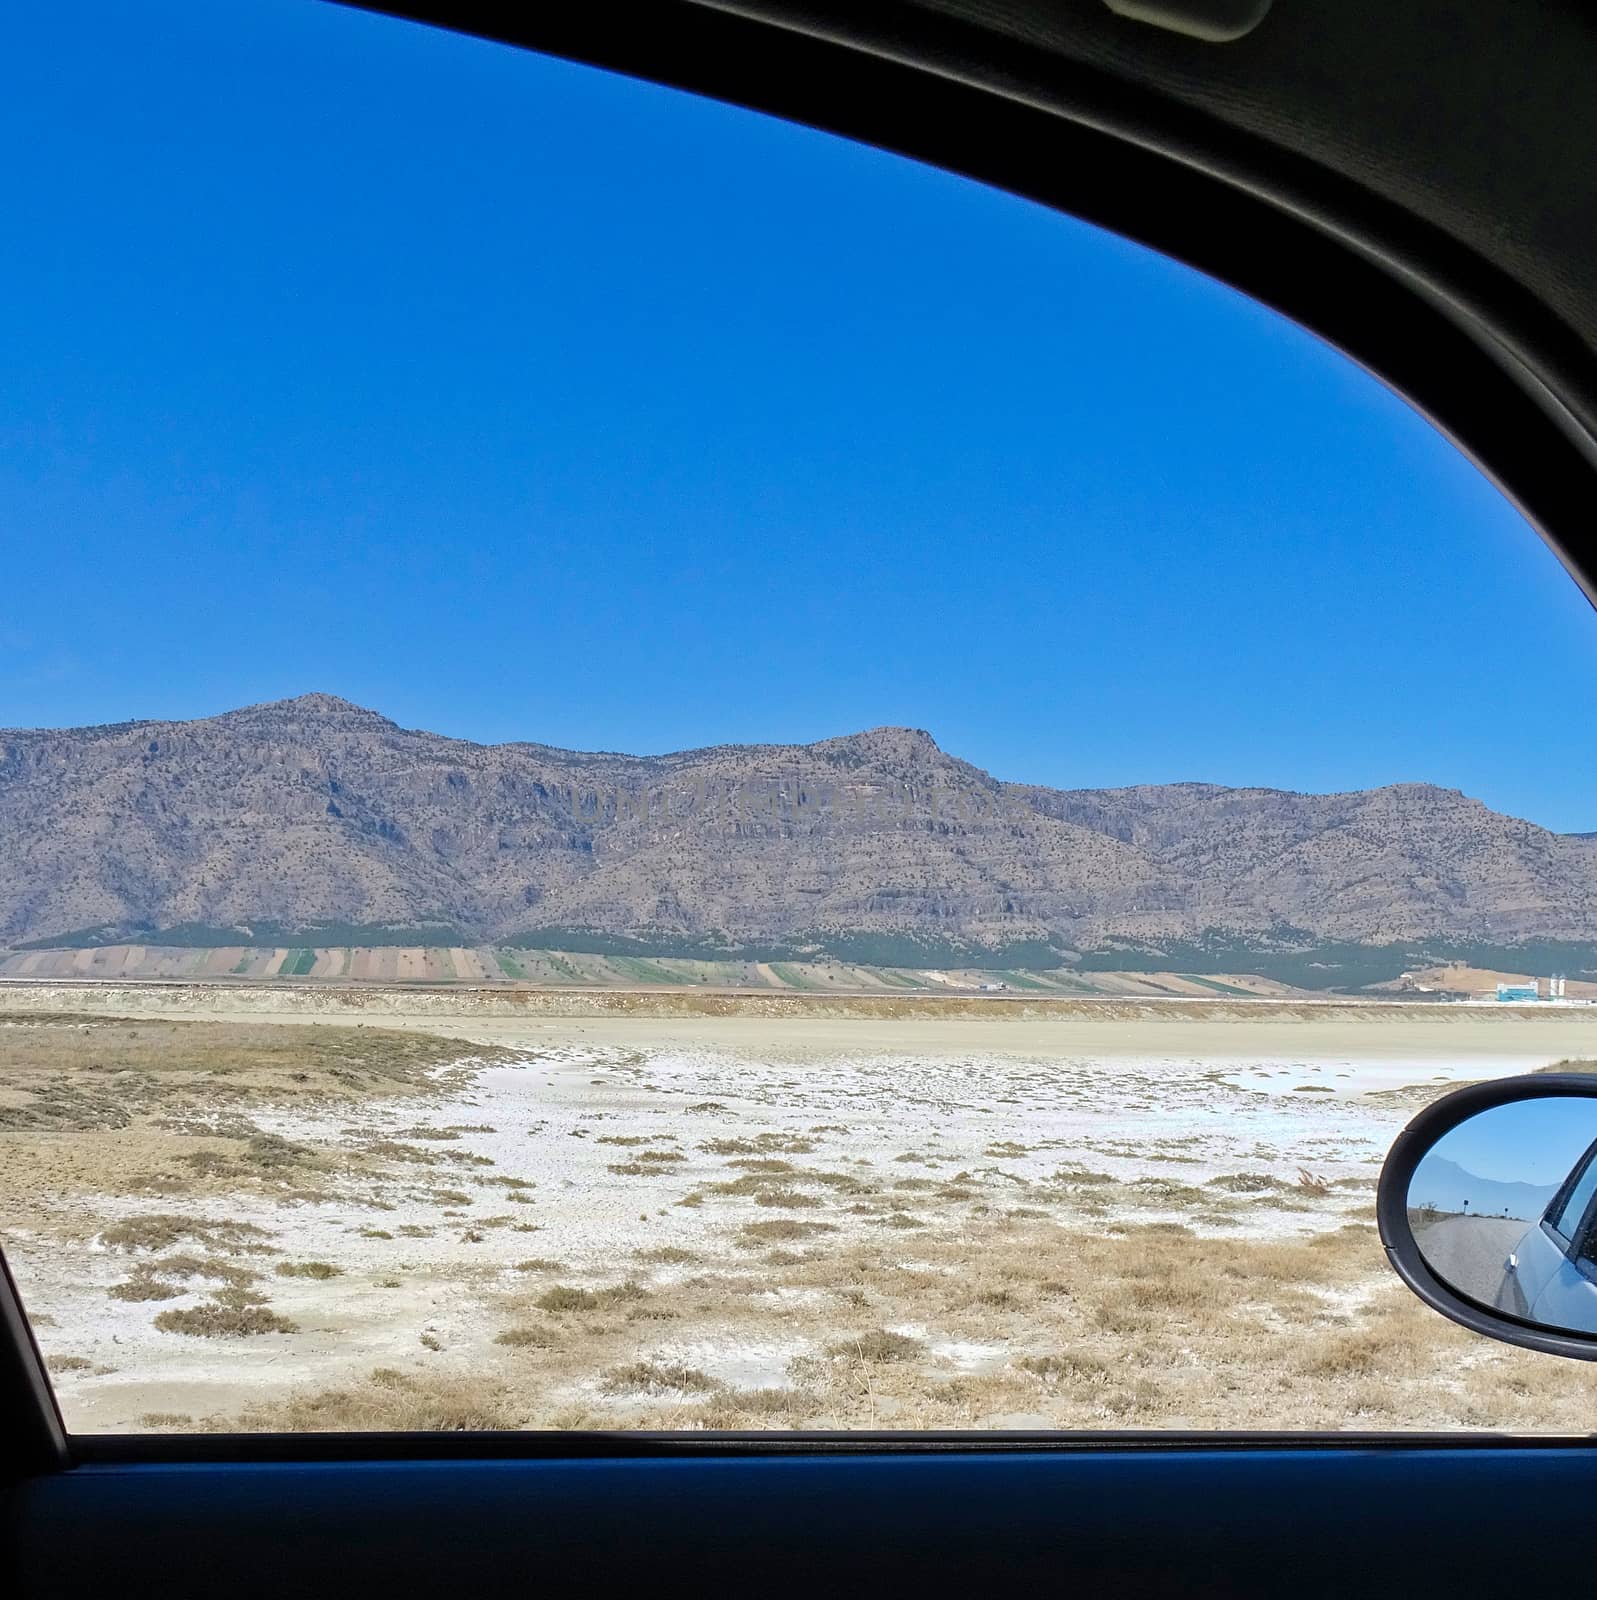 View from the window of a car to the semi-desert in Central Turkey with a salty depression in the foreground and bare rocks on the horizon, blue sky